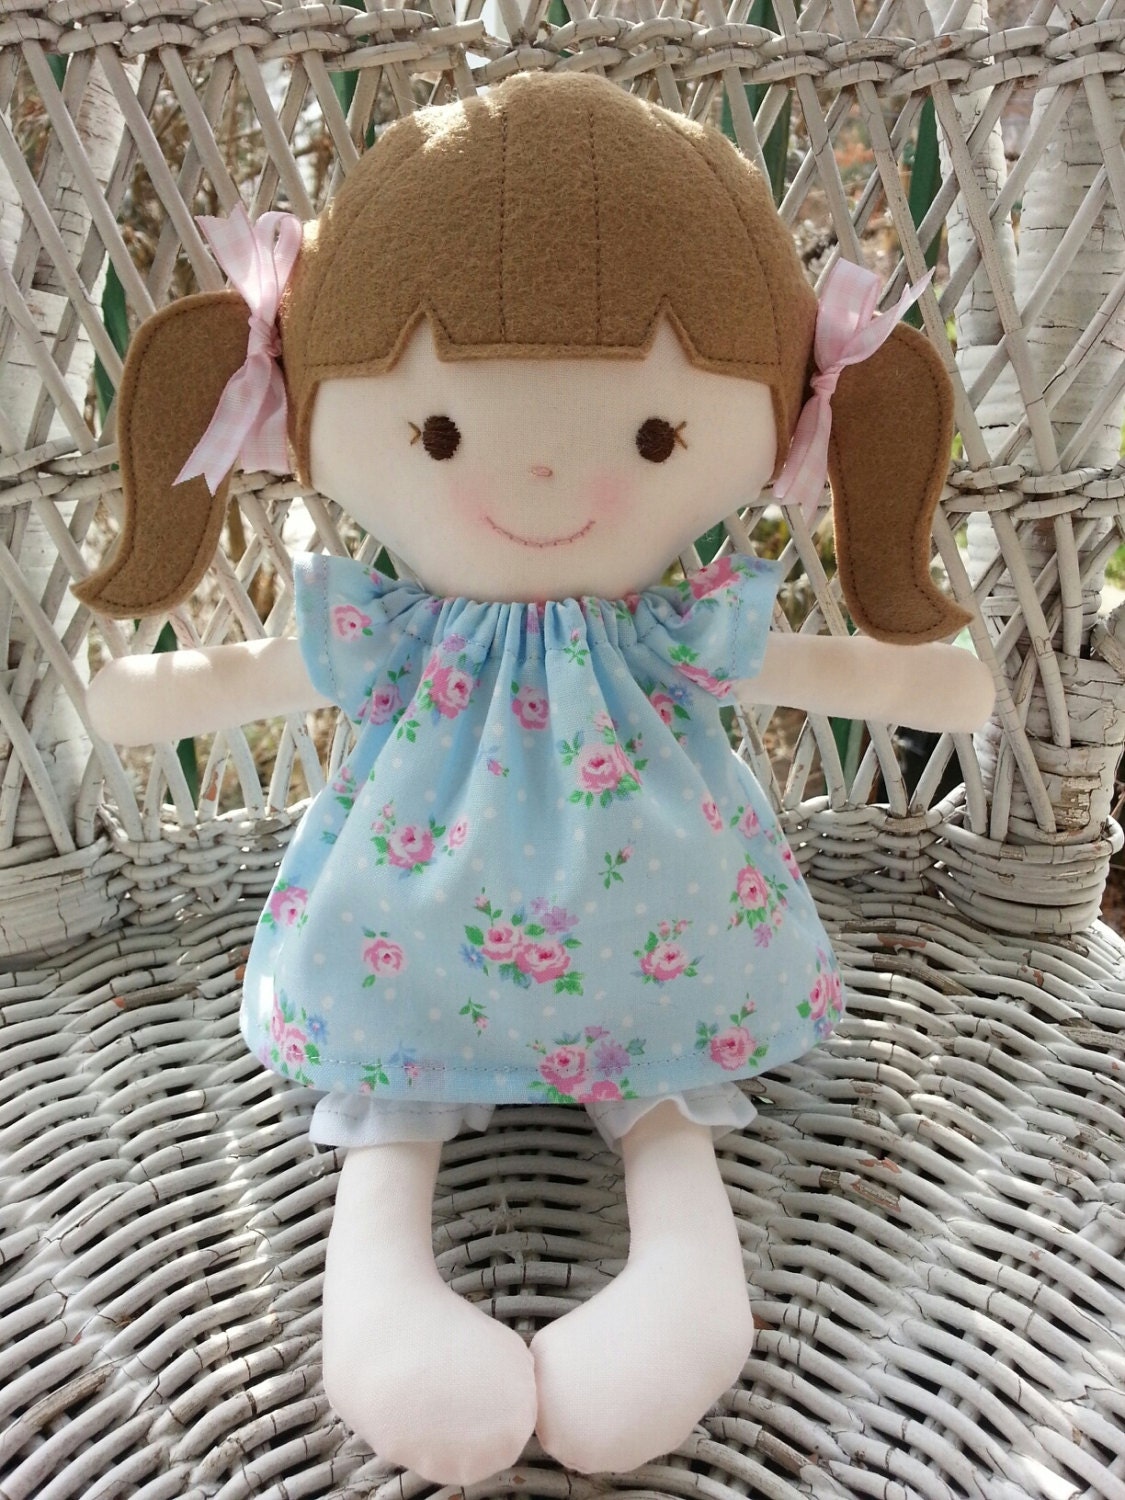 cheer-up-your-kids-let-s-make-a-simple-rag-doll